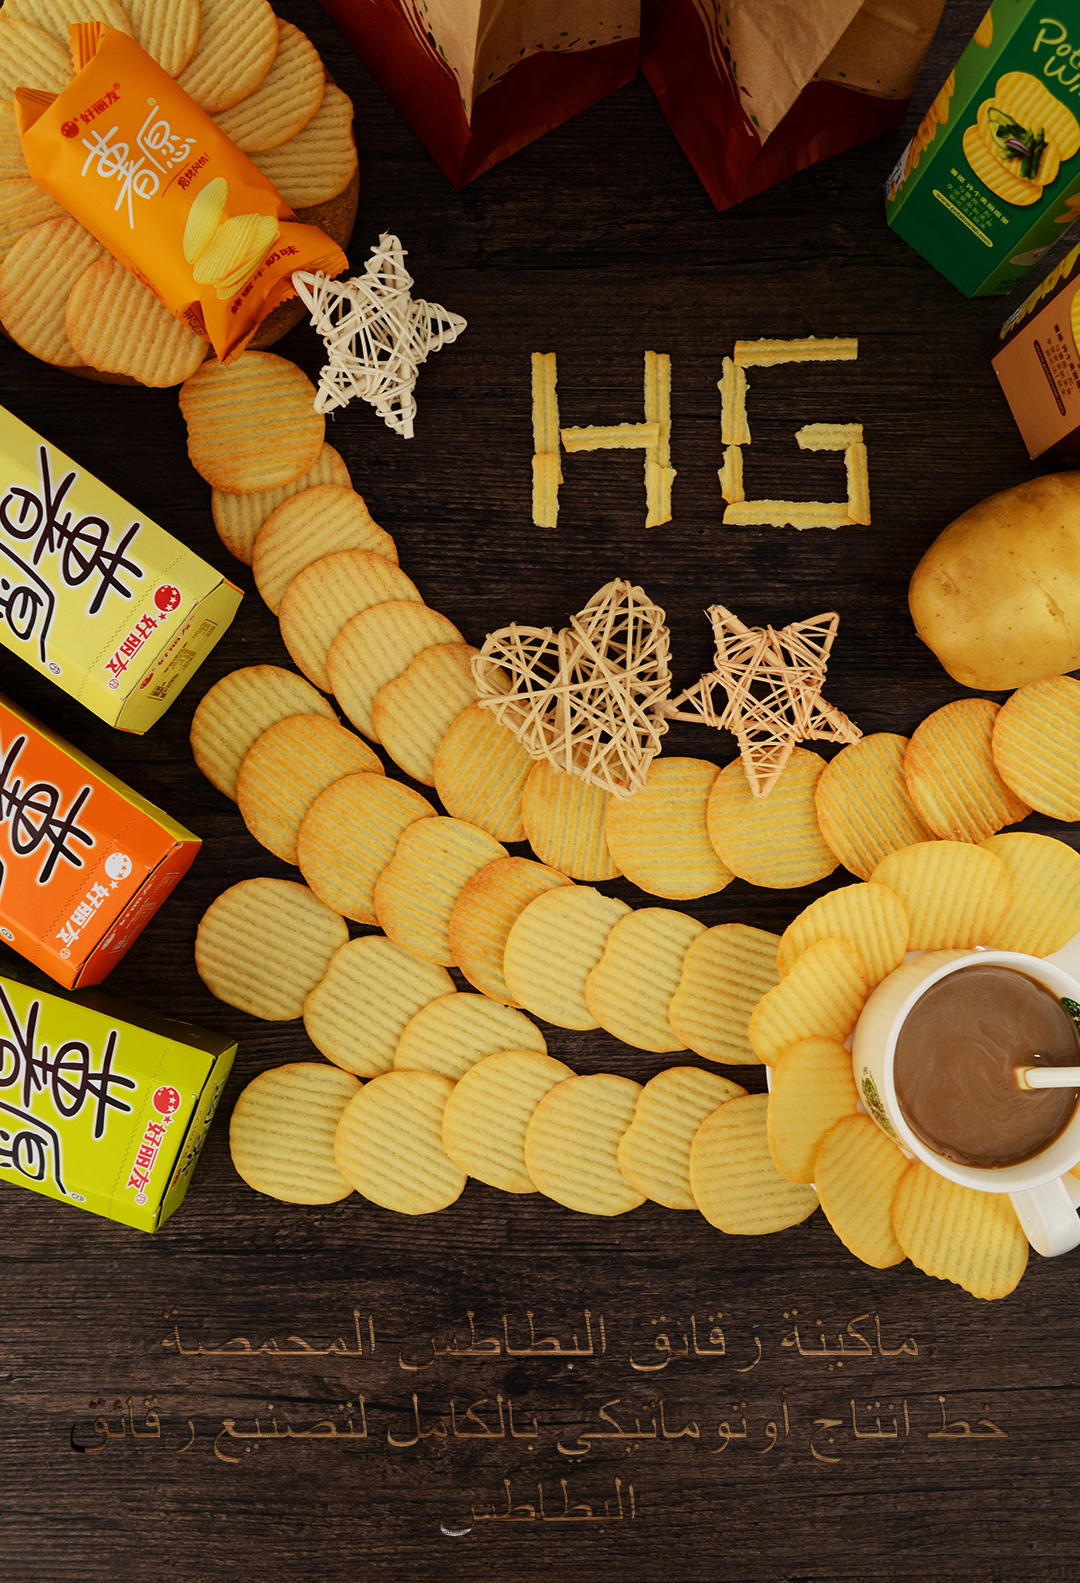 All HG potato chip production line are fully guaranteed